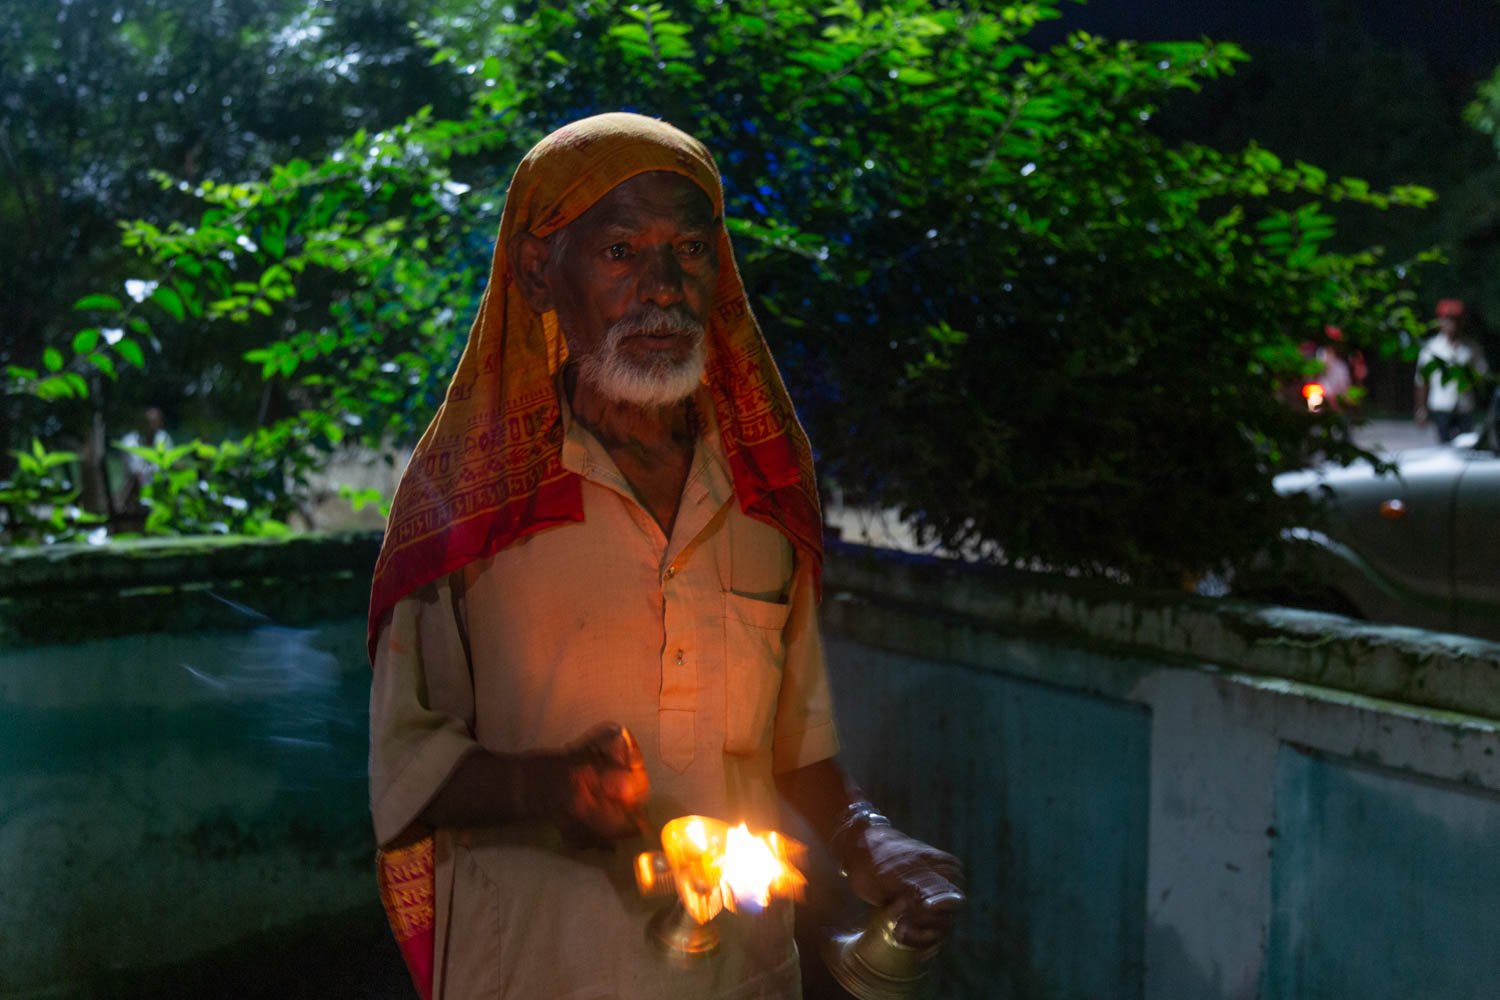  The nightly Hindu ceremony in the village of Nagrain 9, in Ghodhas District outside of Janakpur, Nepal on July 1, 2022. 